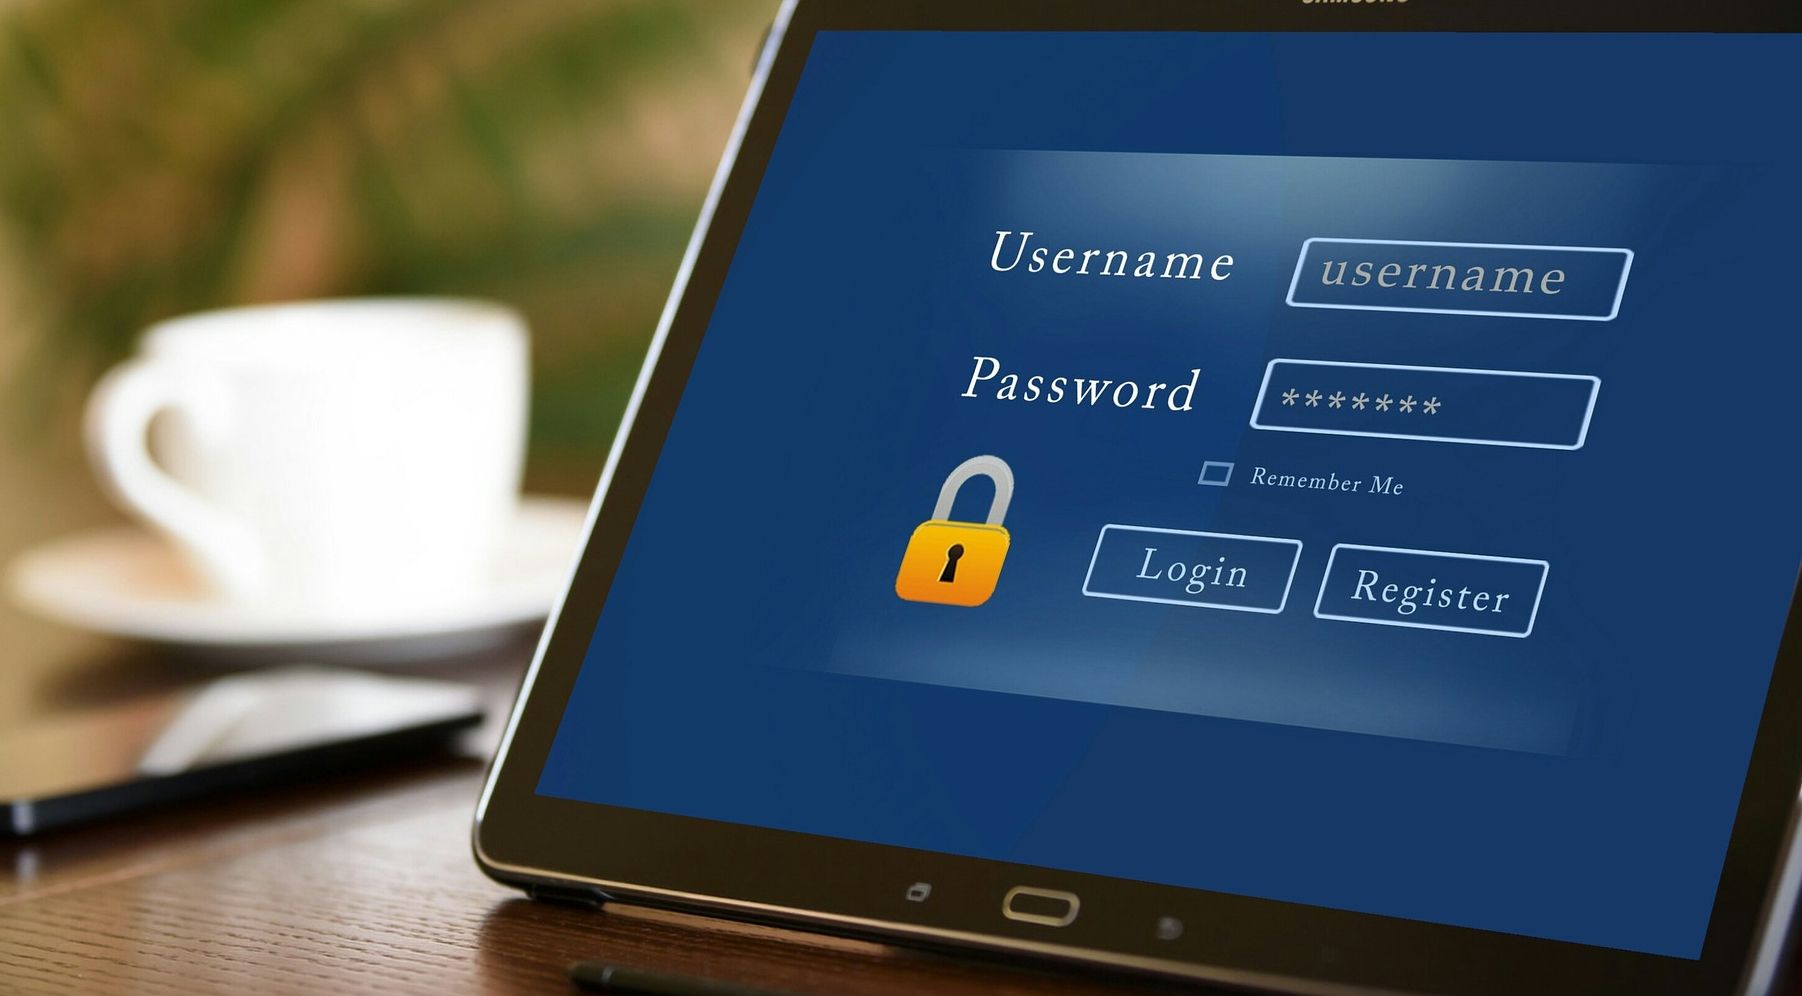 blue login page shown on tablet